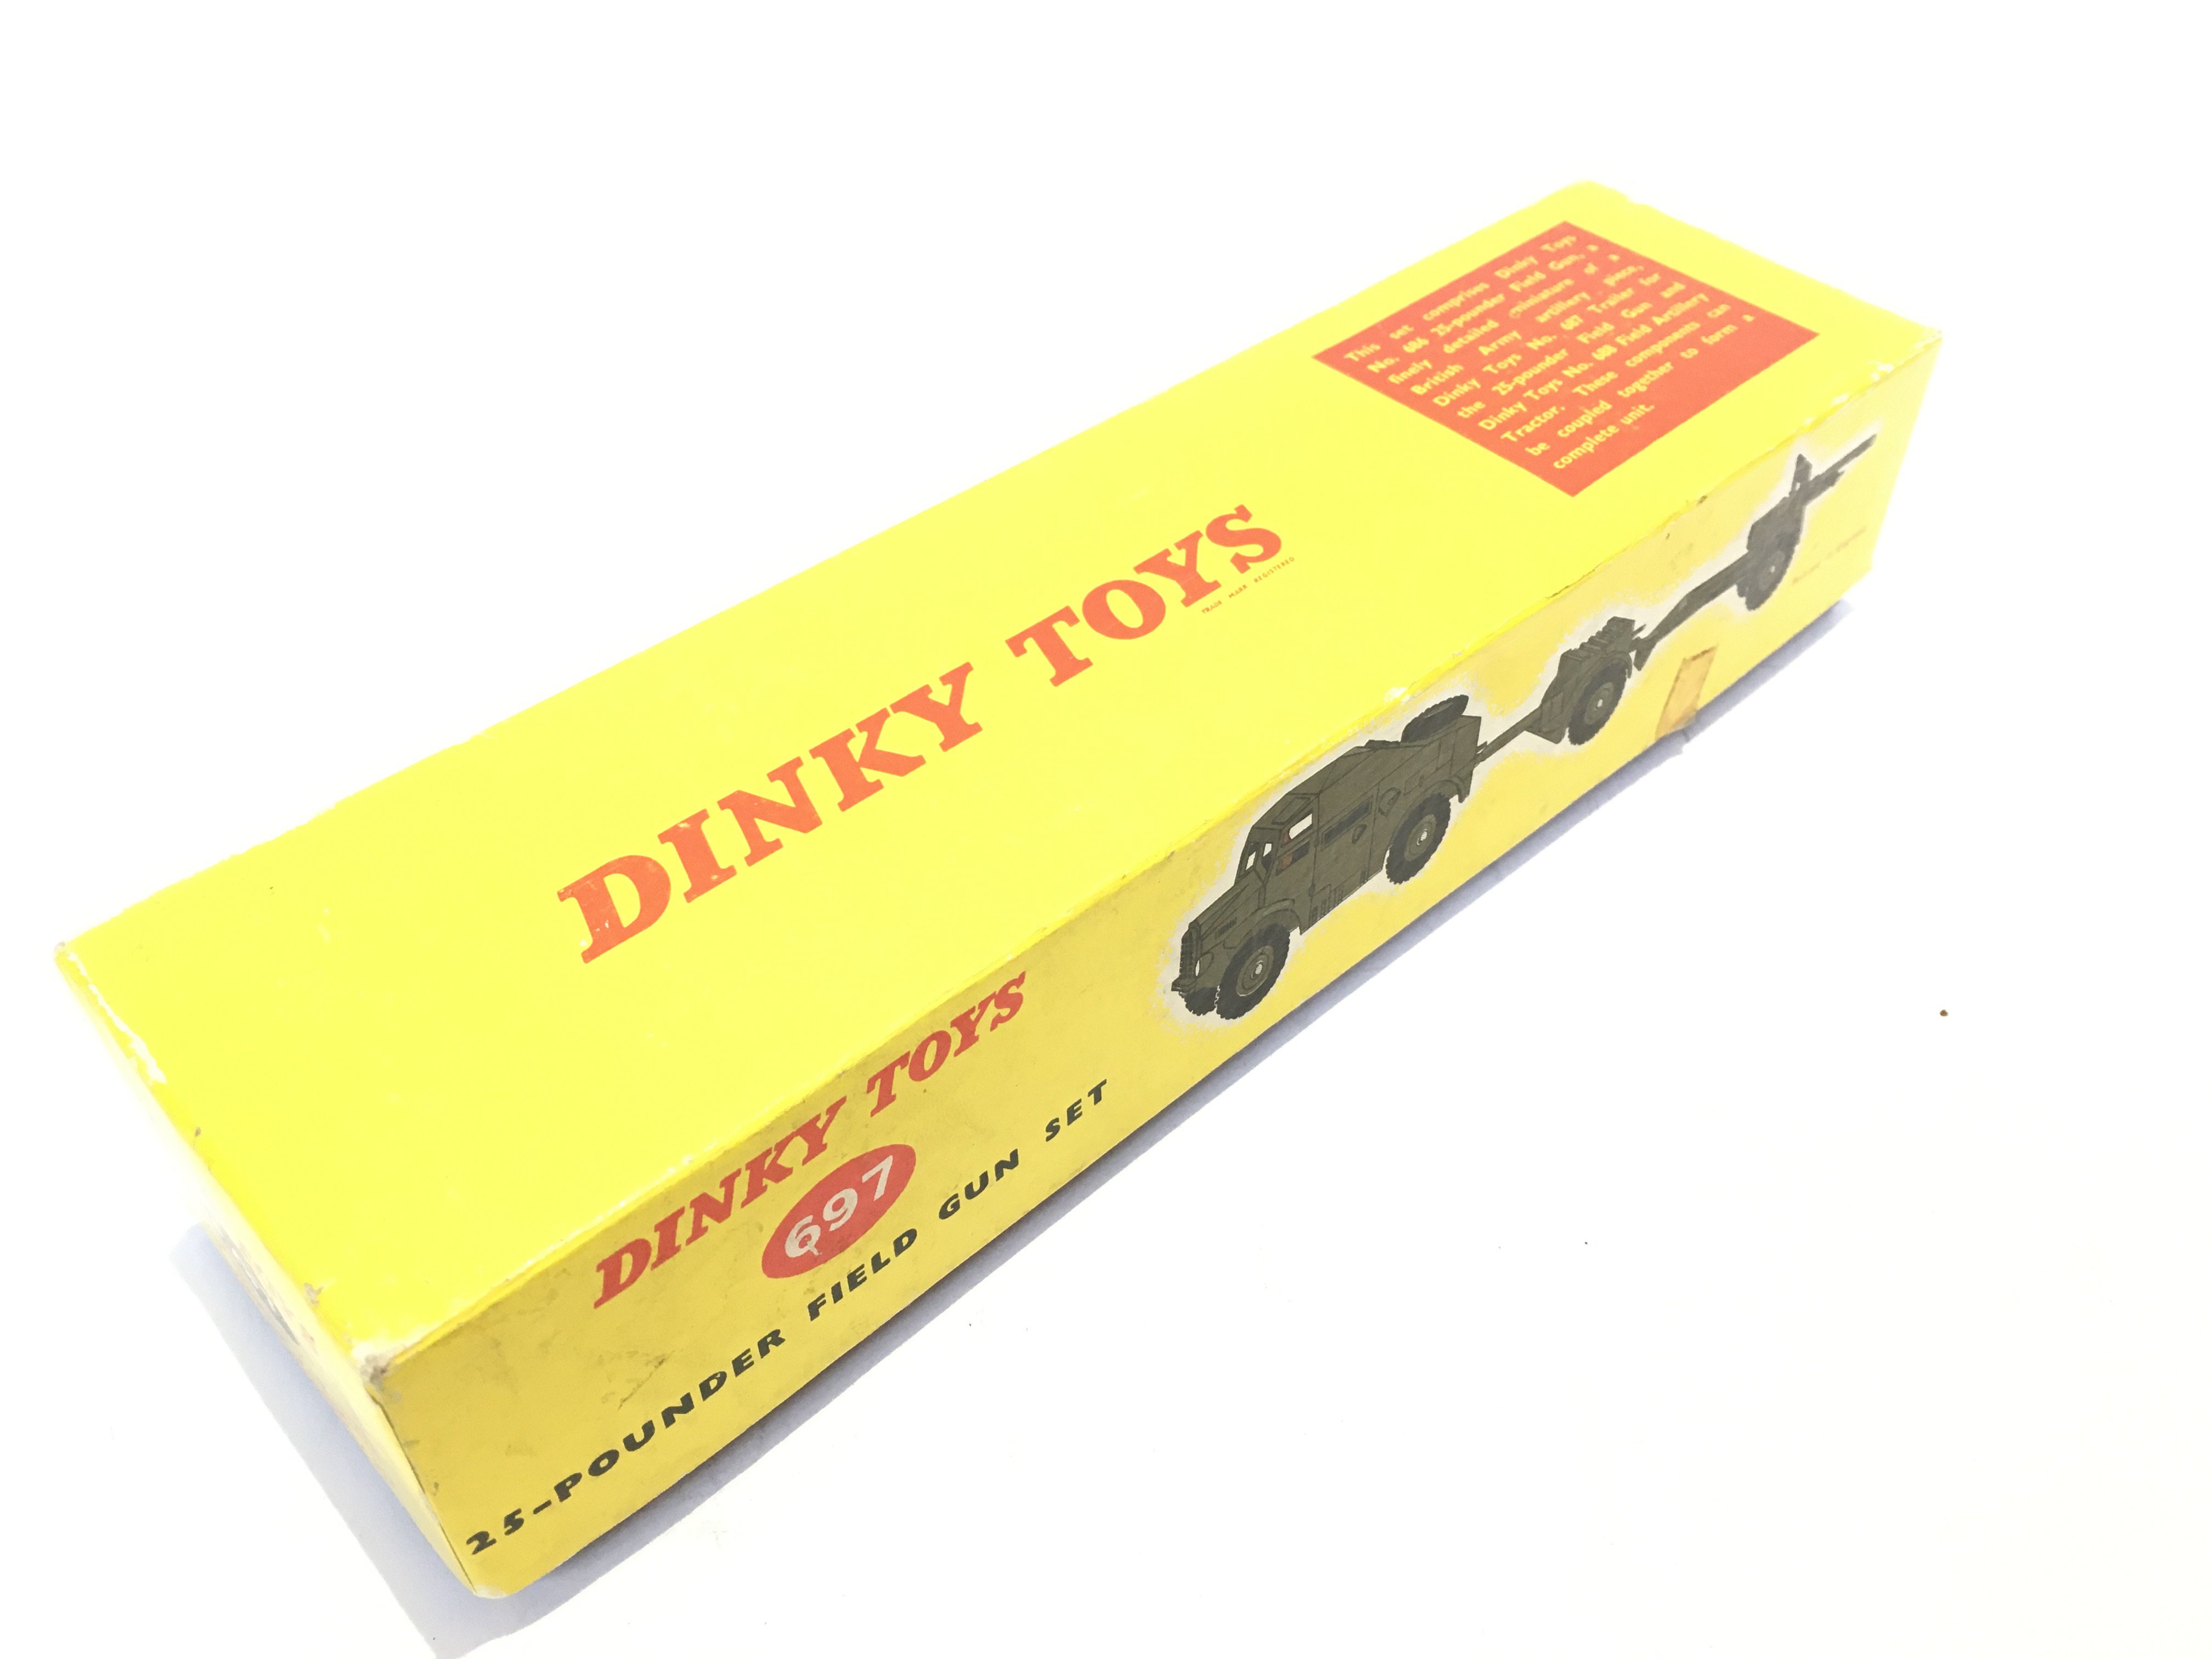 A Boxed Dinky 25-Pounder Field Gun Set #697. - Image 3 of 3